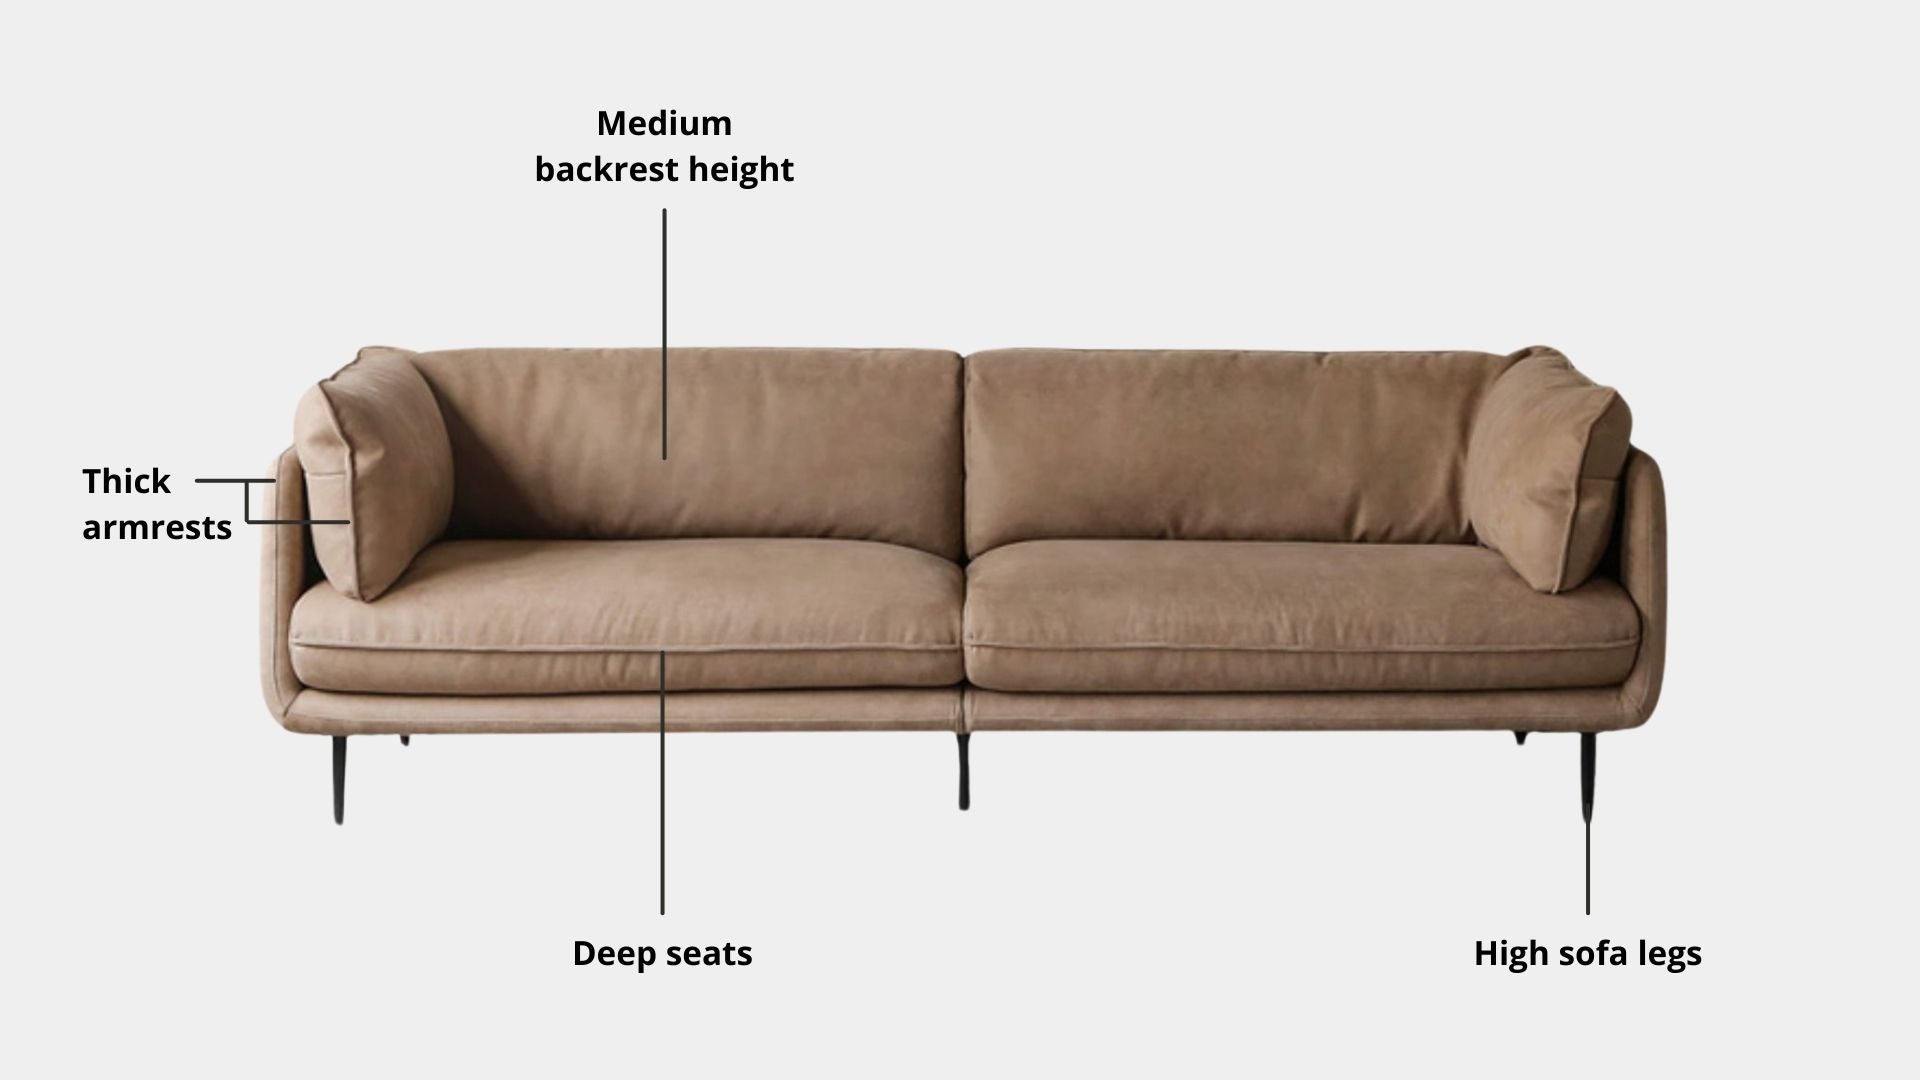 Key features such as armrest thickness, cushion height, seat depth and sofa leg height for Cuddle Fabric Sofa